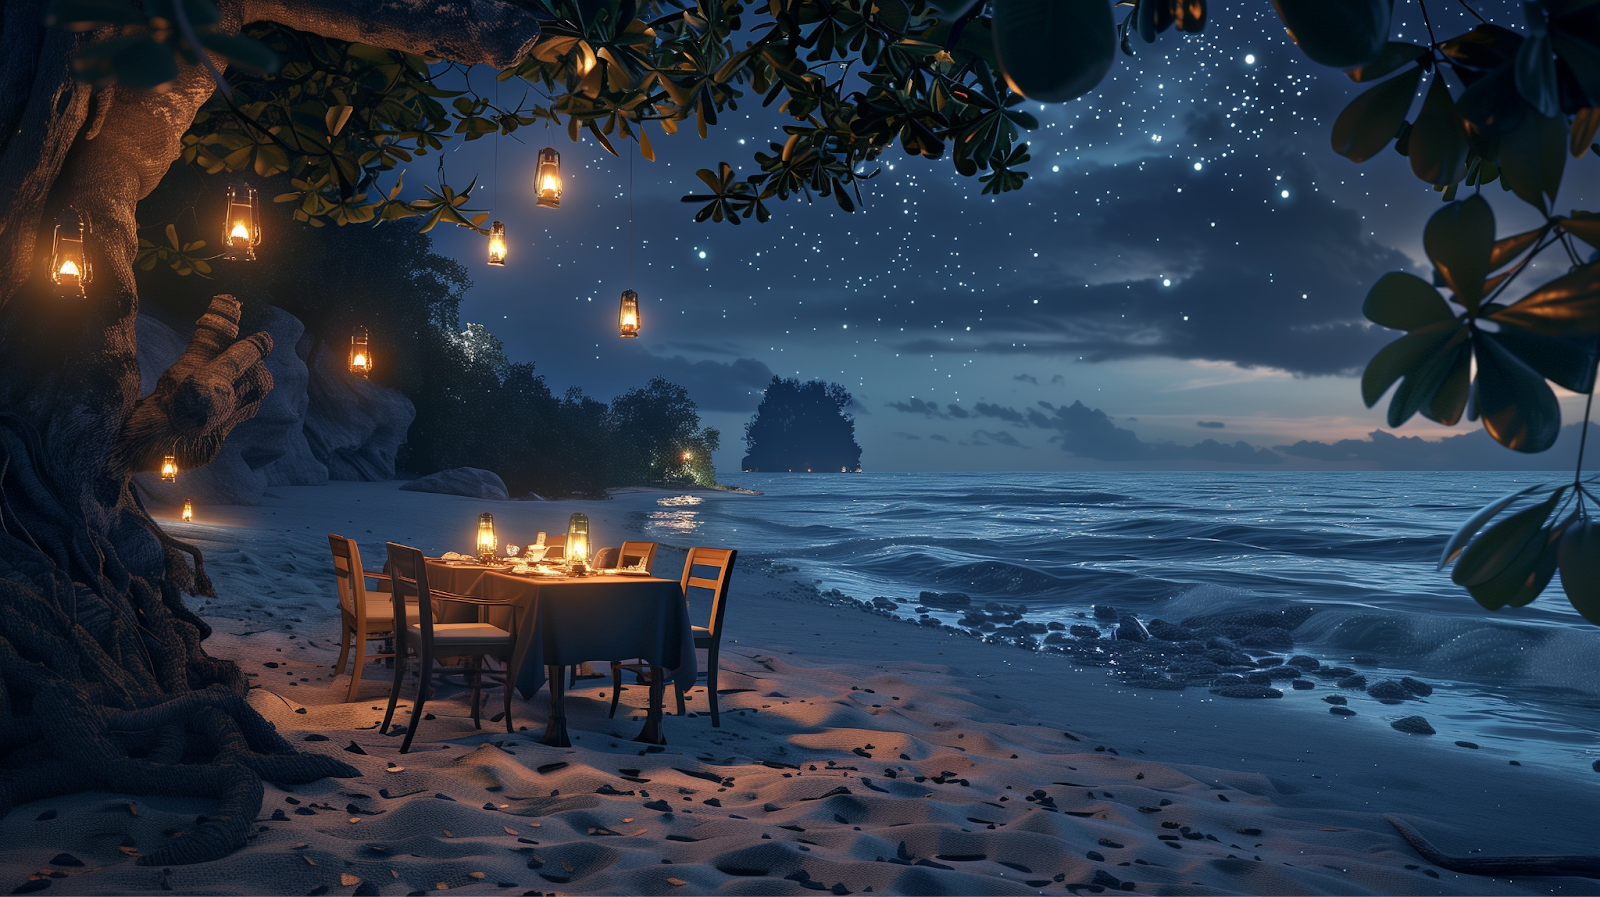 Intimate beach dinner under the stars with soft lantern light and gentle waves.